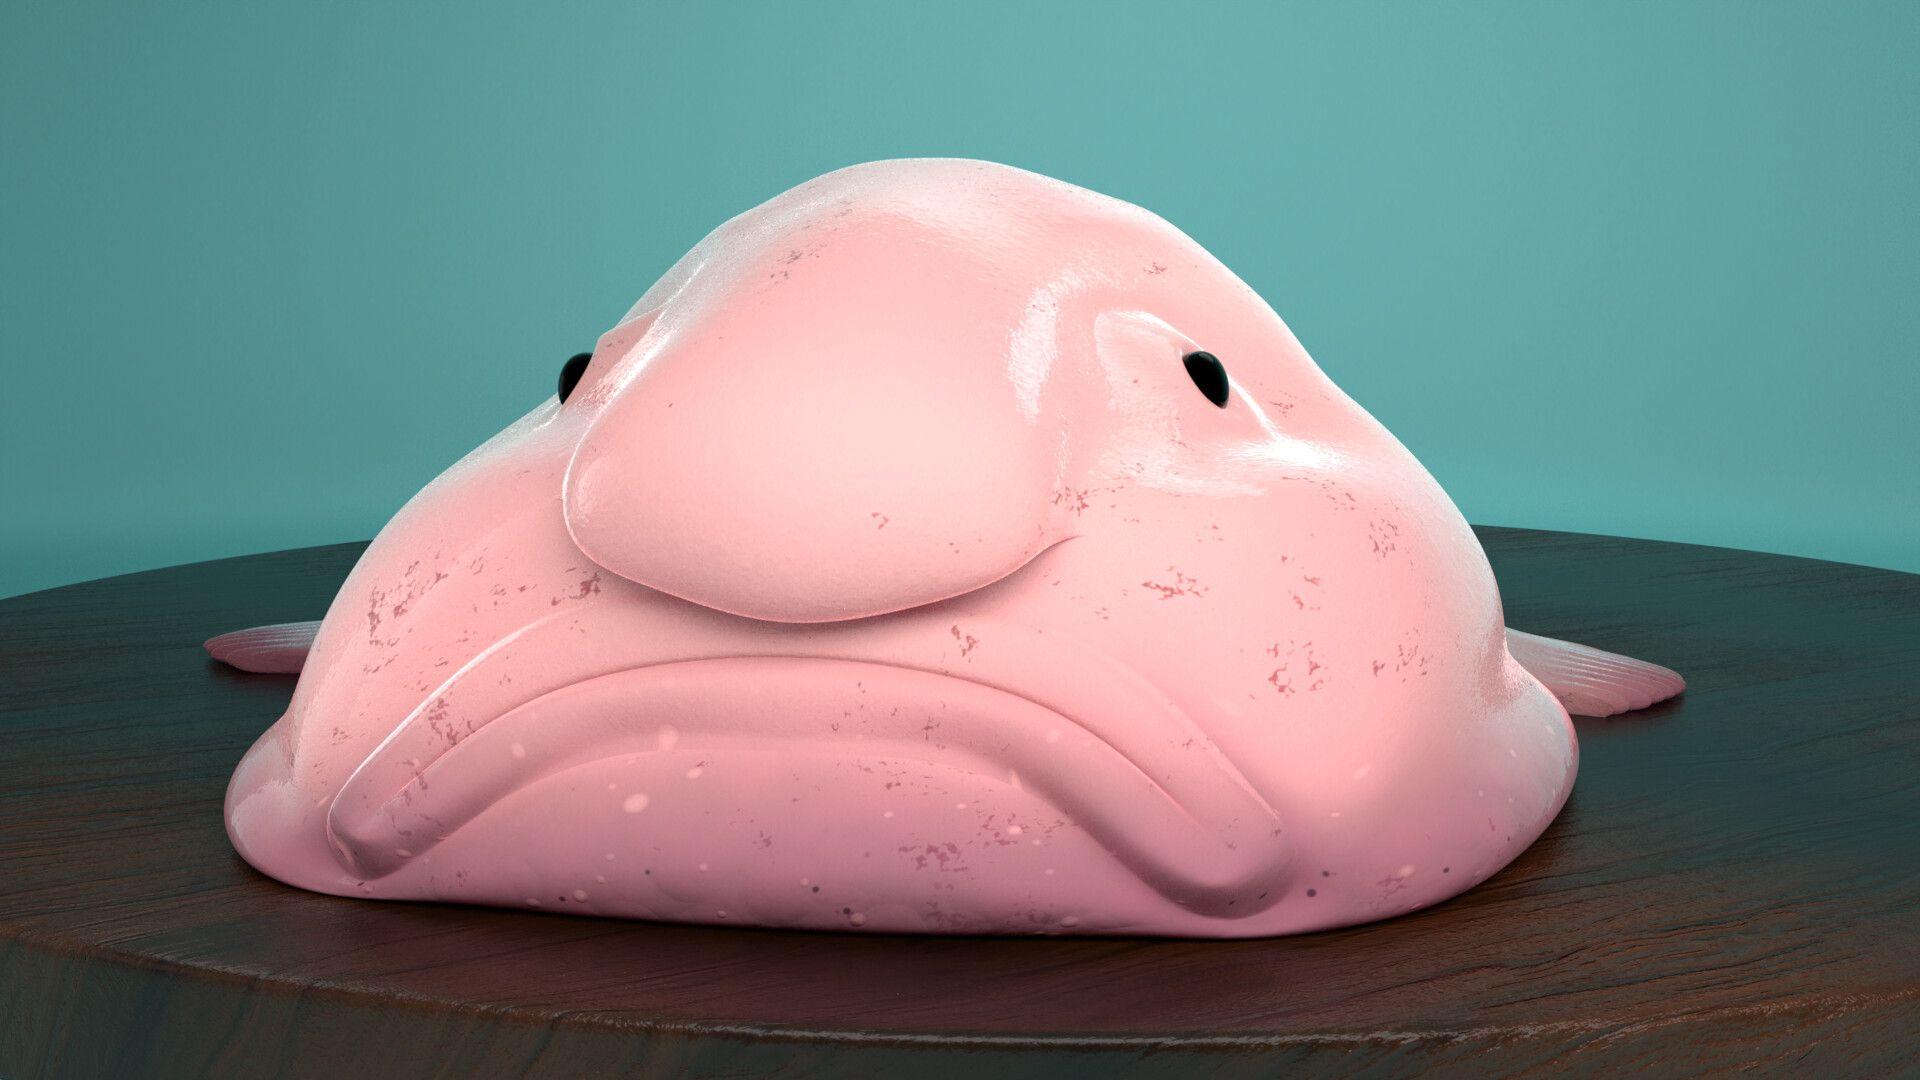 Safely Endangered on Twitter This months Patreon wallpaper features a  handsome blobfish httpstcoRWYzqgEoqf httpstcoln3K6bOMDl  Twitter